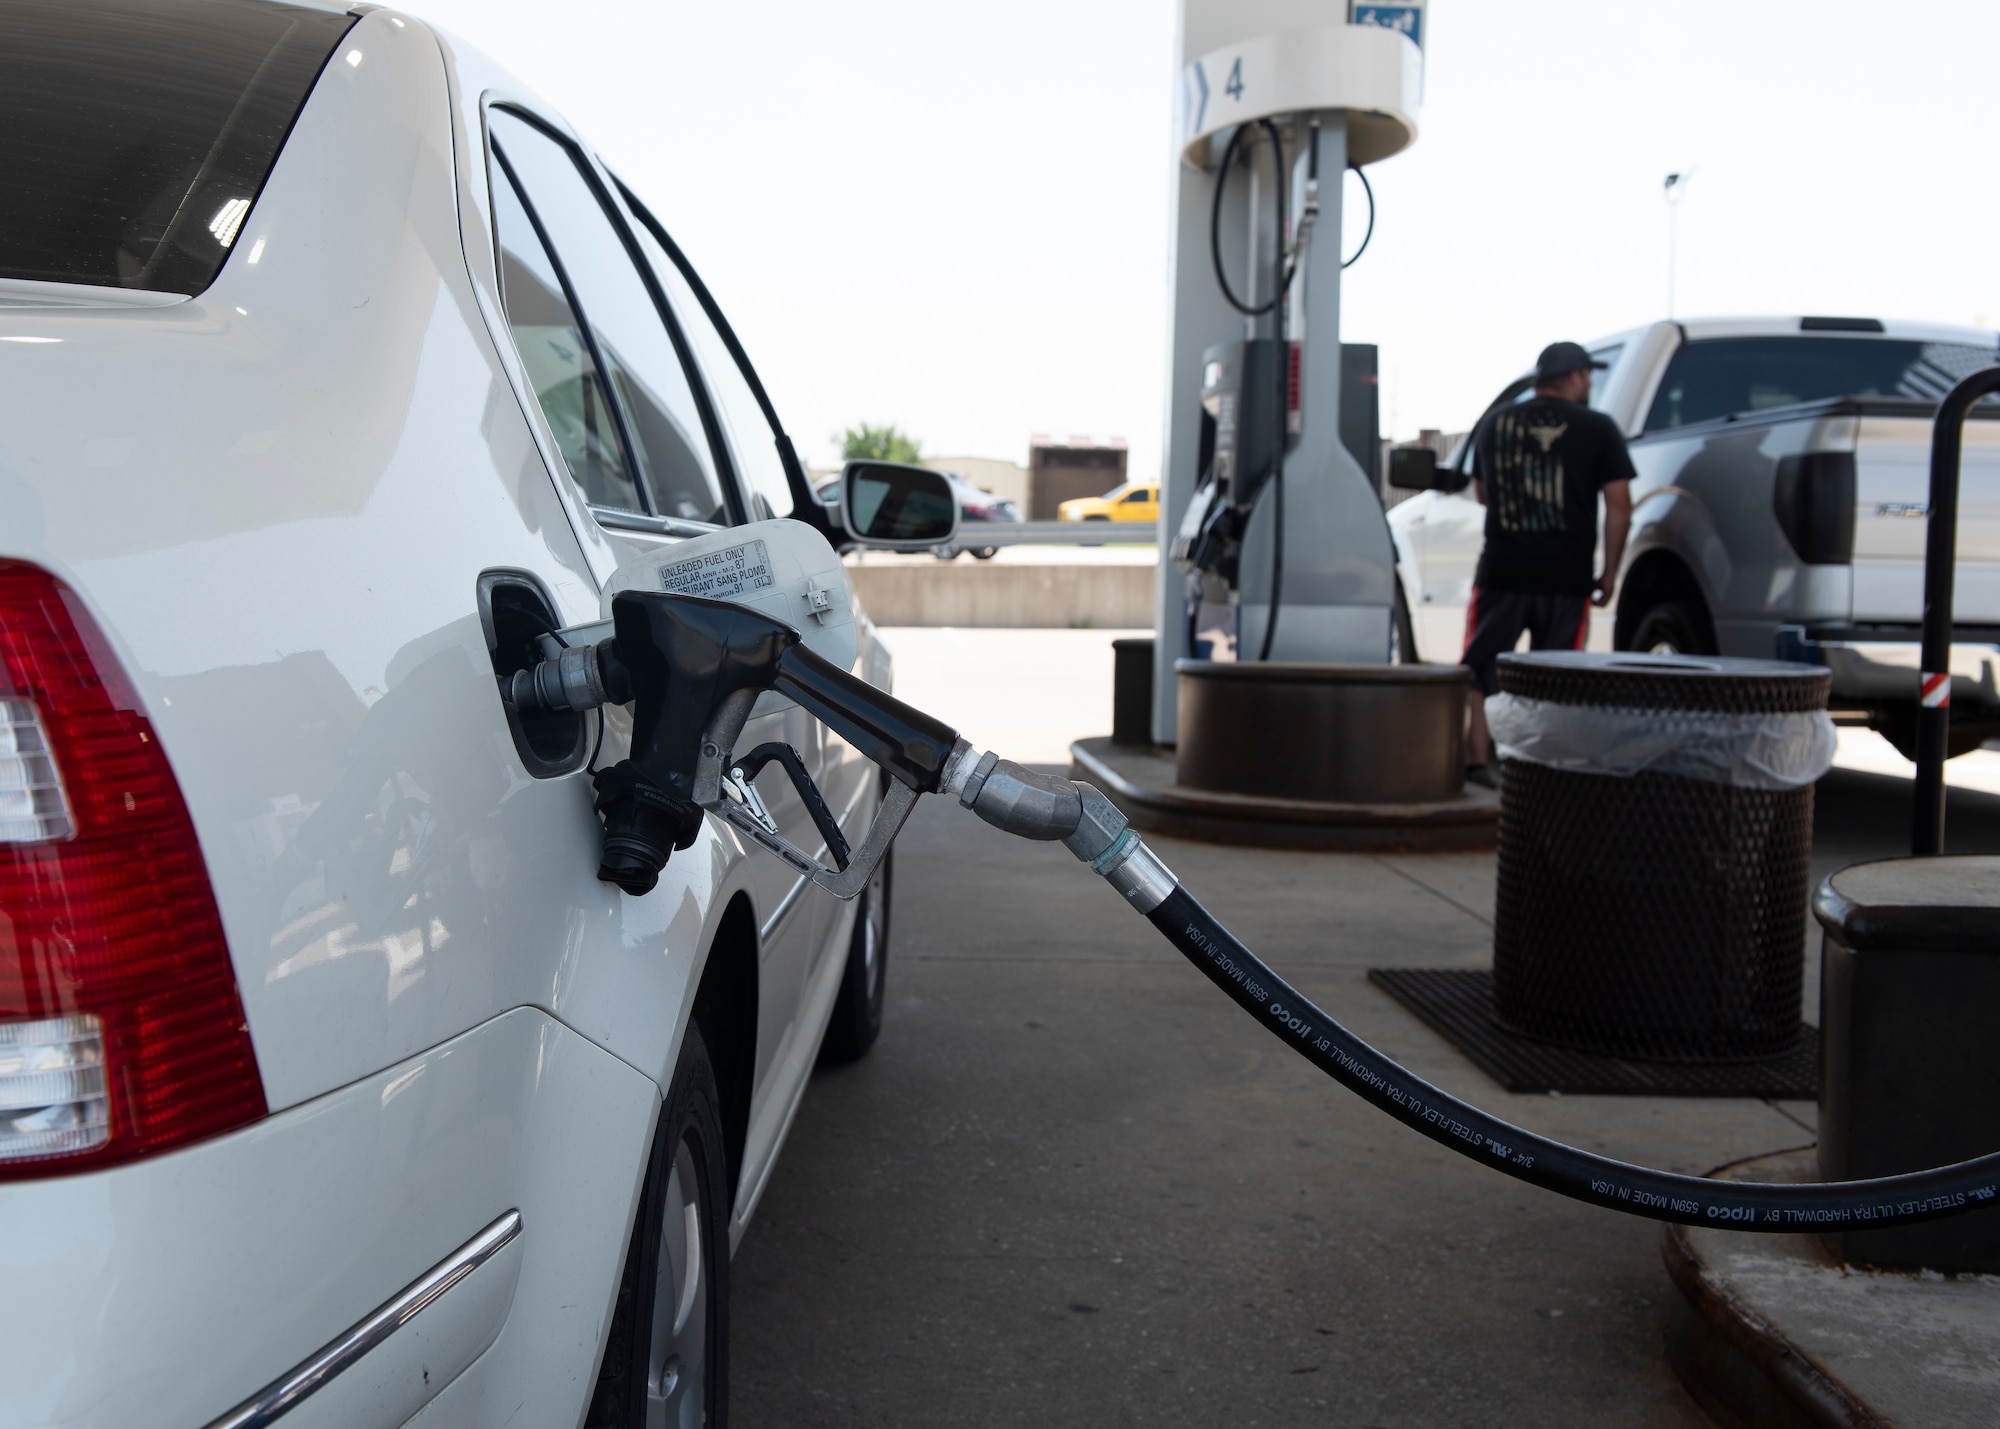 Members of Whiteman Air Force Base, Missouri, pump gas at the AAFES shoppette on June 28, 2019. The gas station now featured extender hoses, which are designed to reach to the opposite side of a vehicle, allowing drivers to fill up while adhering to the one-way flow traffic rules. (U.S. Air Force photo by Staff Sgt. Kayla White)